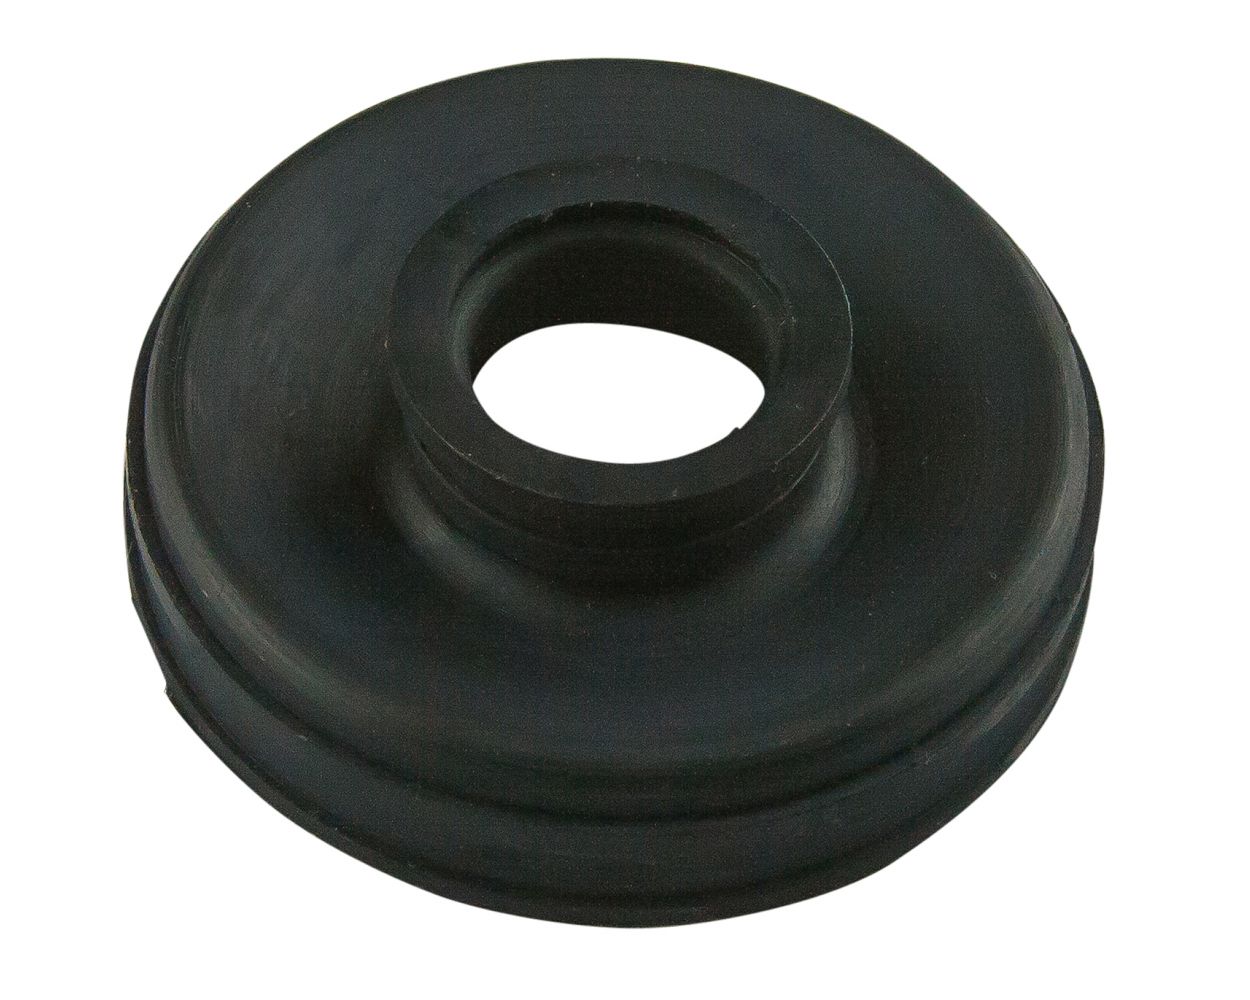 Valve Bellow and O-Ring Compatible with Seadoo 951 947 Rave XP GTX GSX SPX LRV RX OEM# 420260728